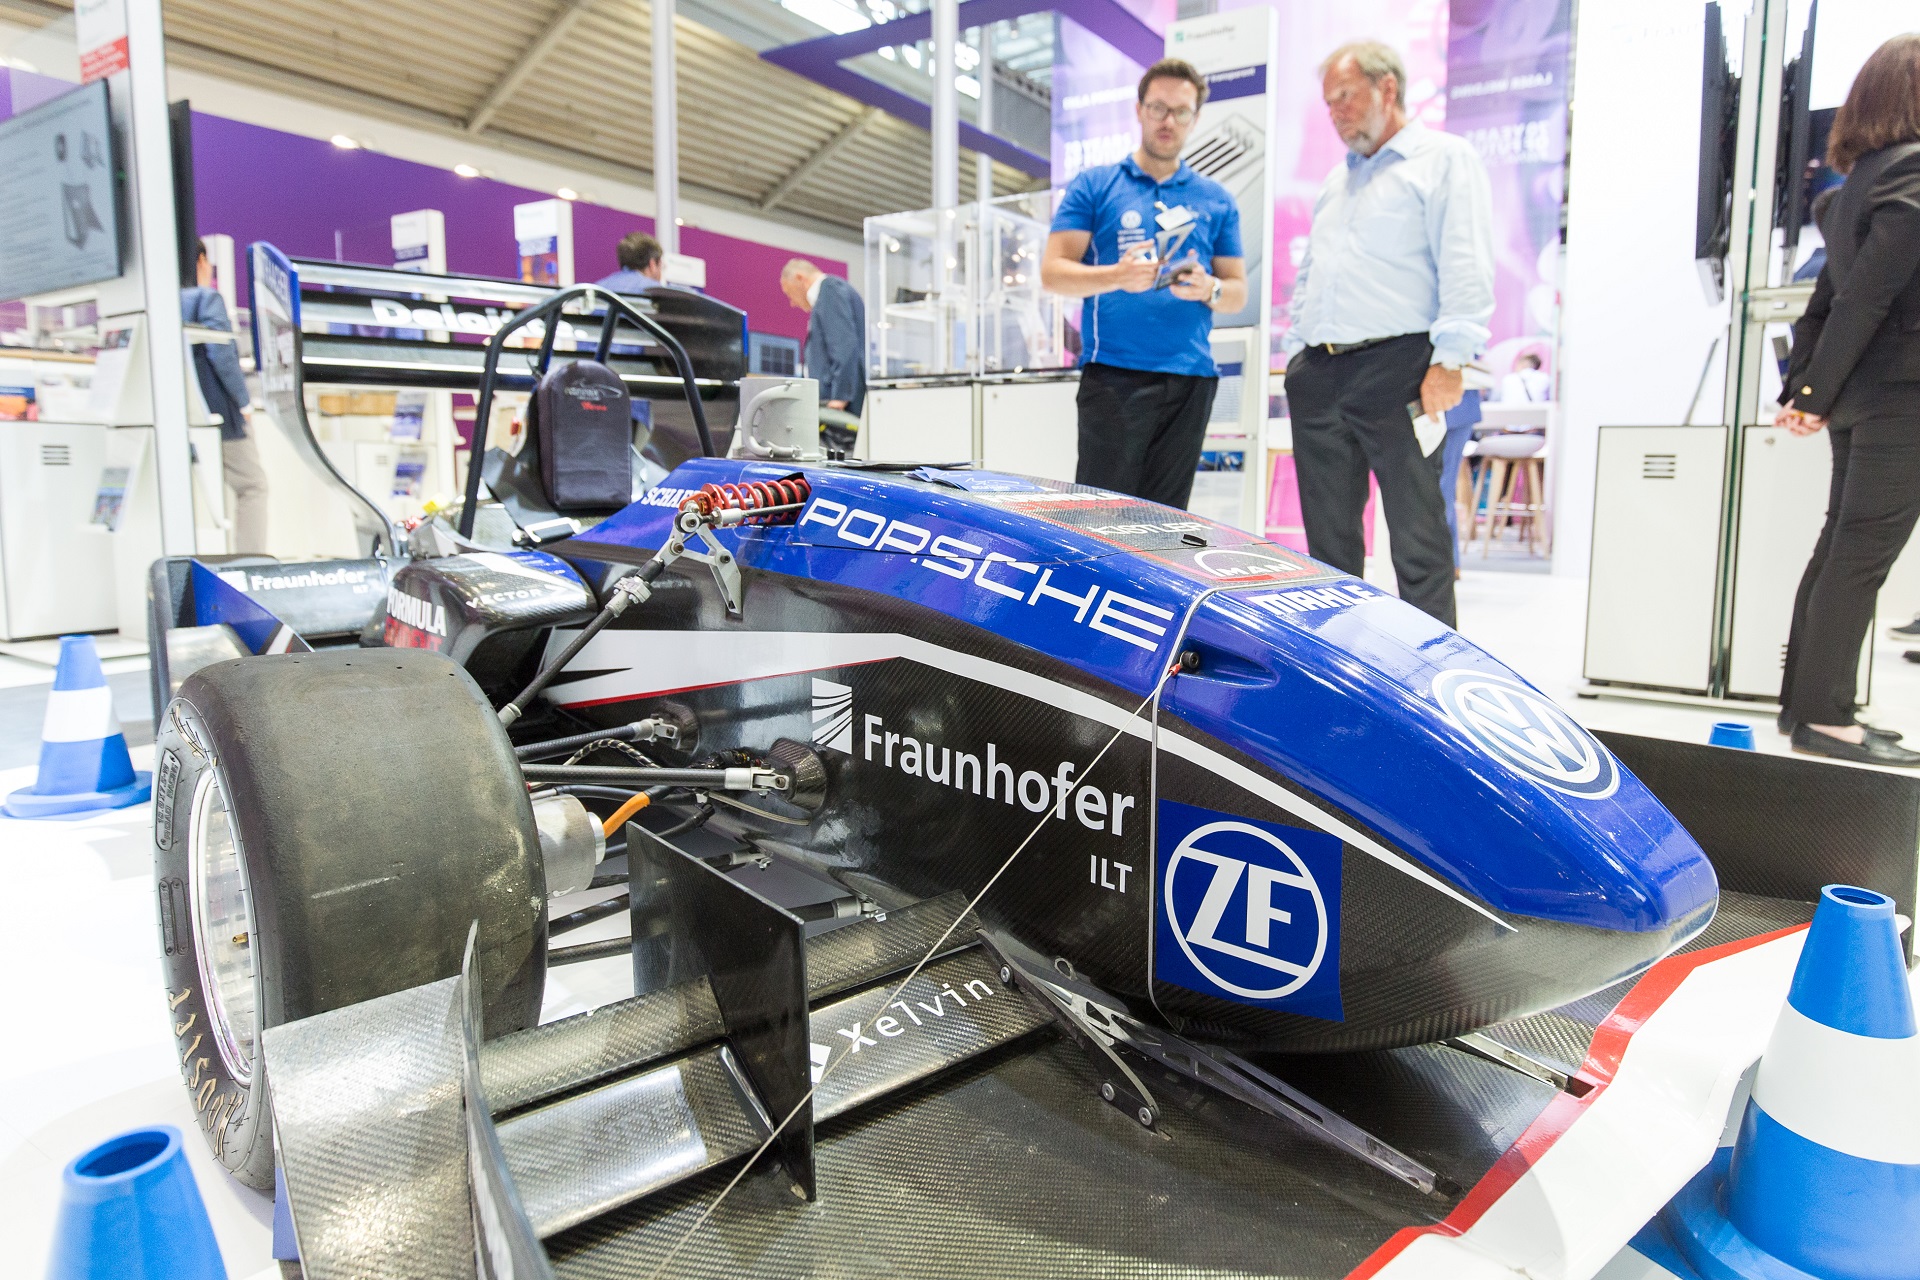 At the trade fair, the electric racing car “eace05” from the Ecurie Aix – Formula Student Team at RWTH Aachen University showed how laser technology creates completely new possibilities in lightweight construction and e-mobility.